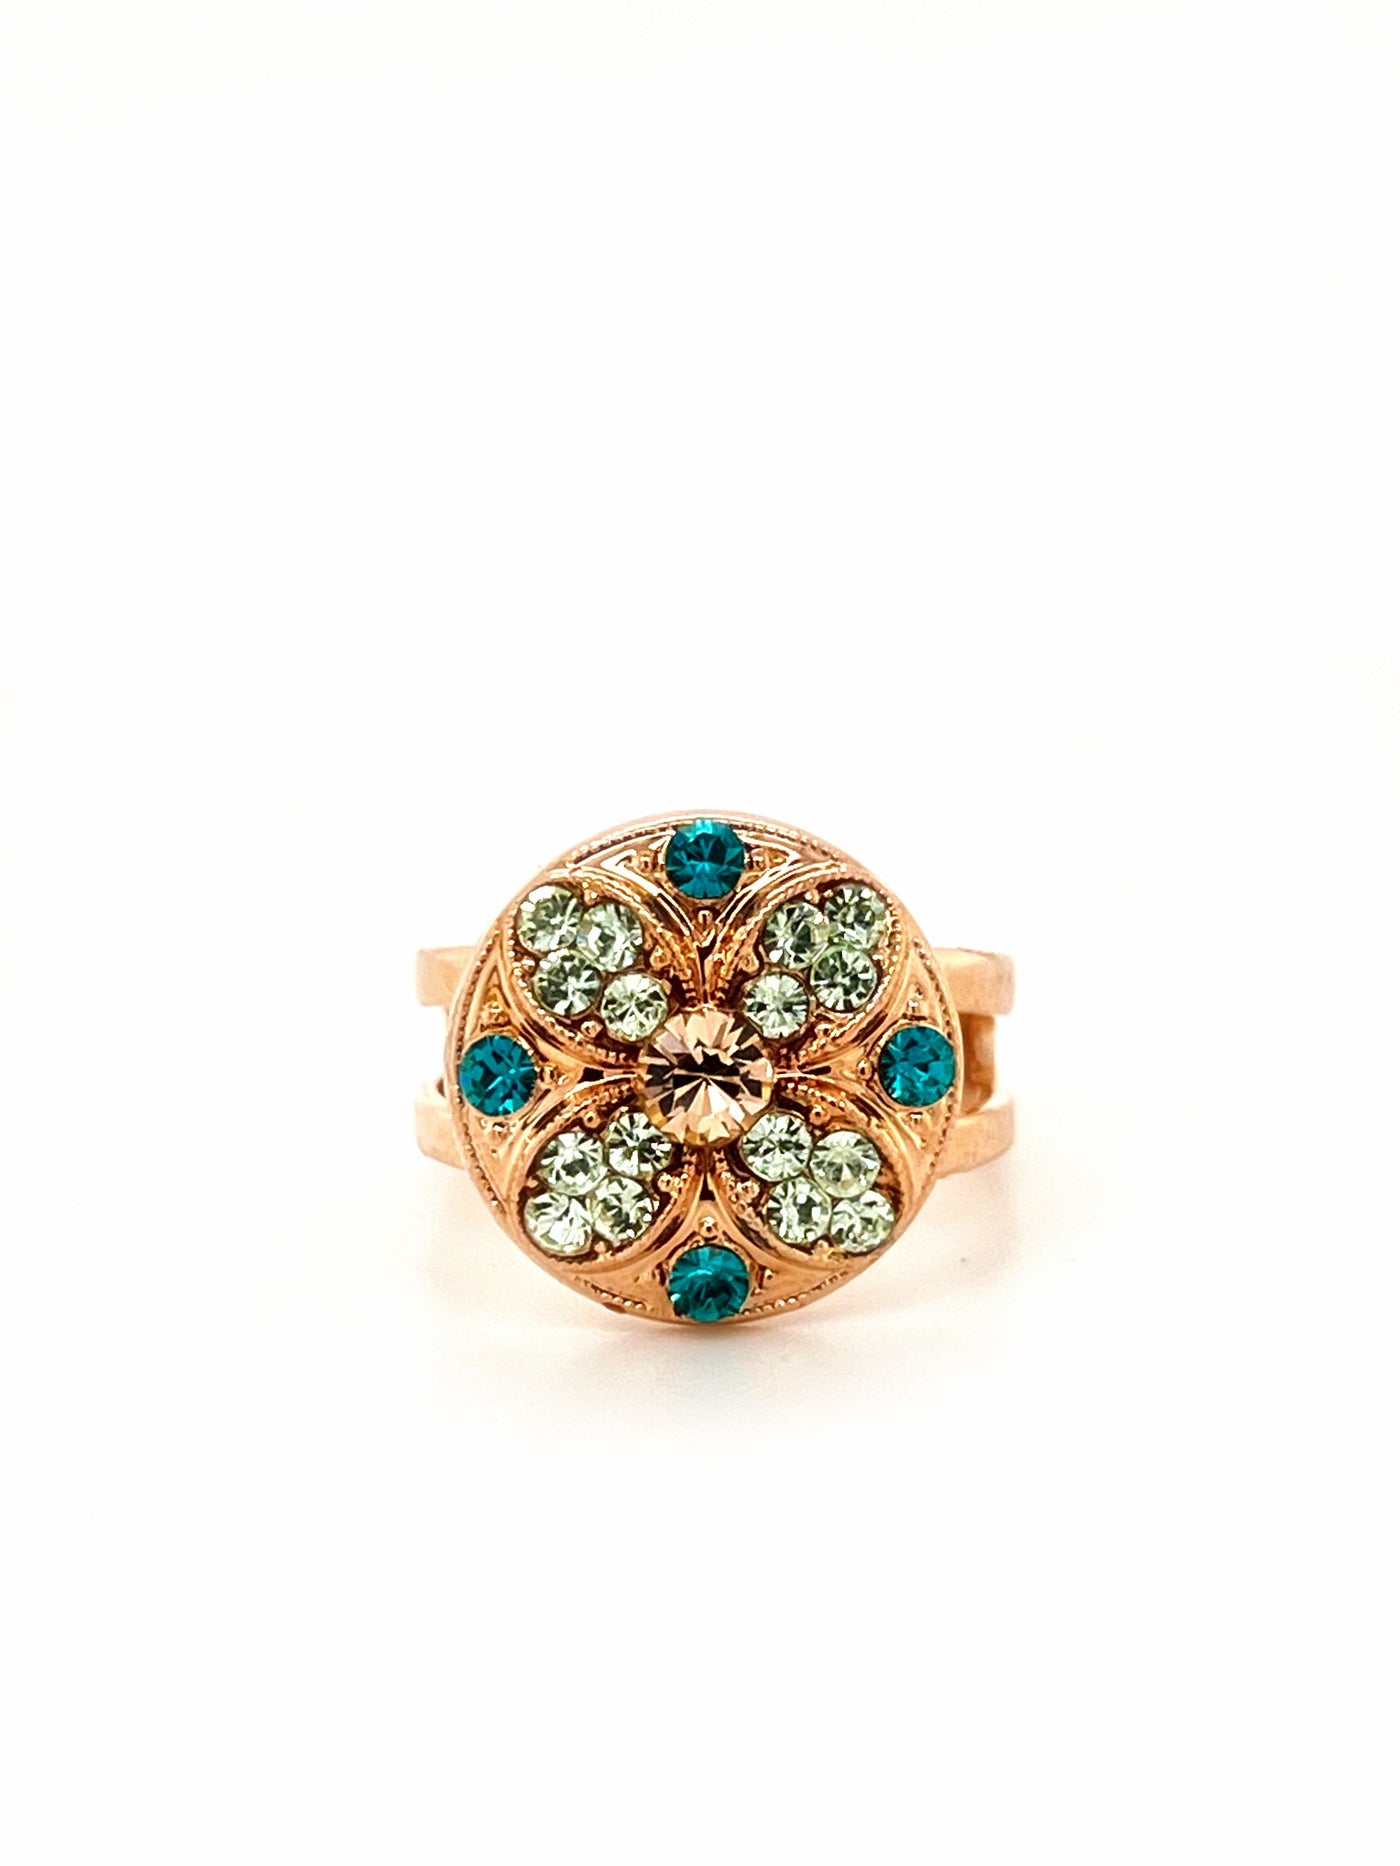 Teal & champagne crystal ring